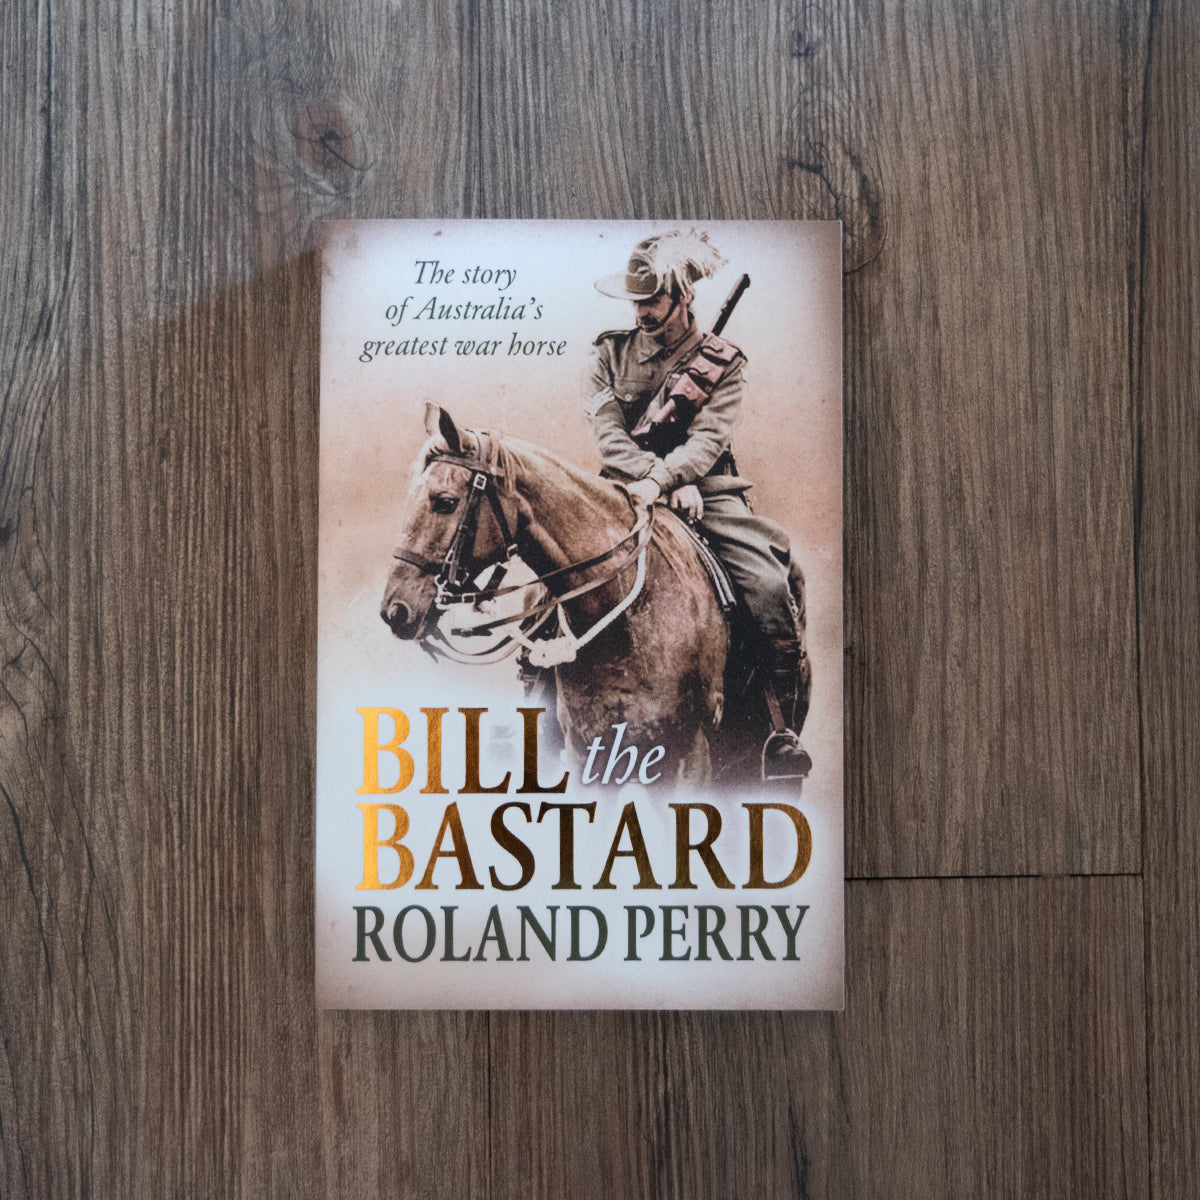 Bill the Bastard book  - The story of Australia's greatest war horse by Roland Perry